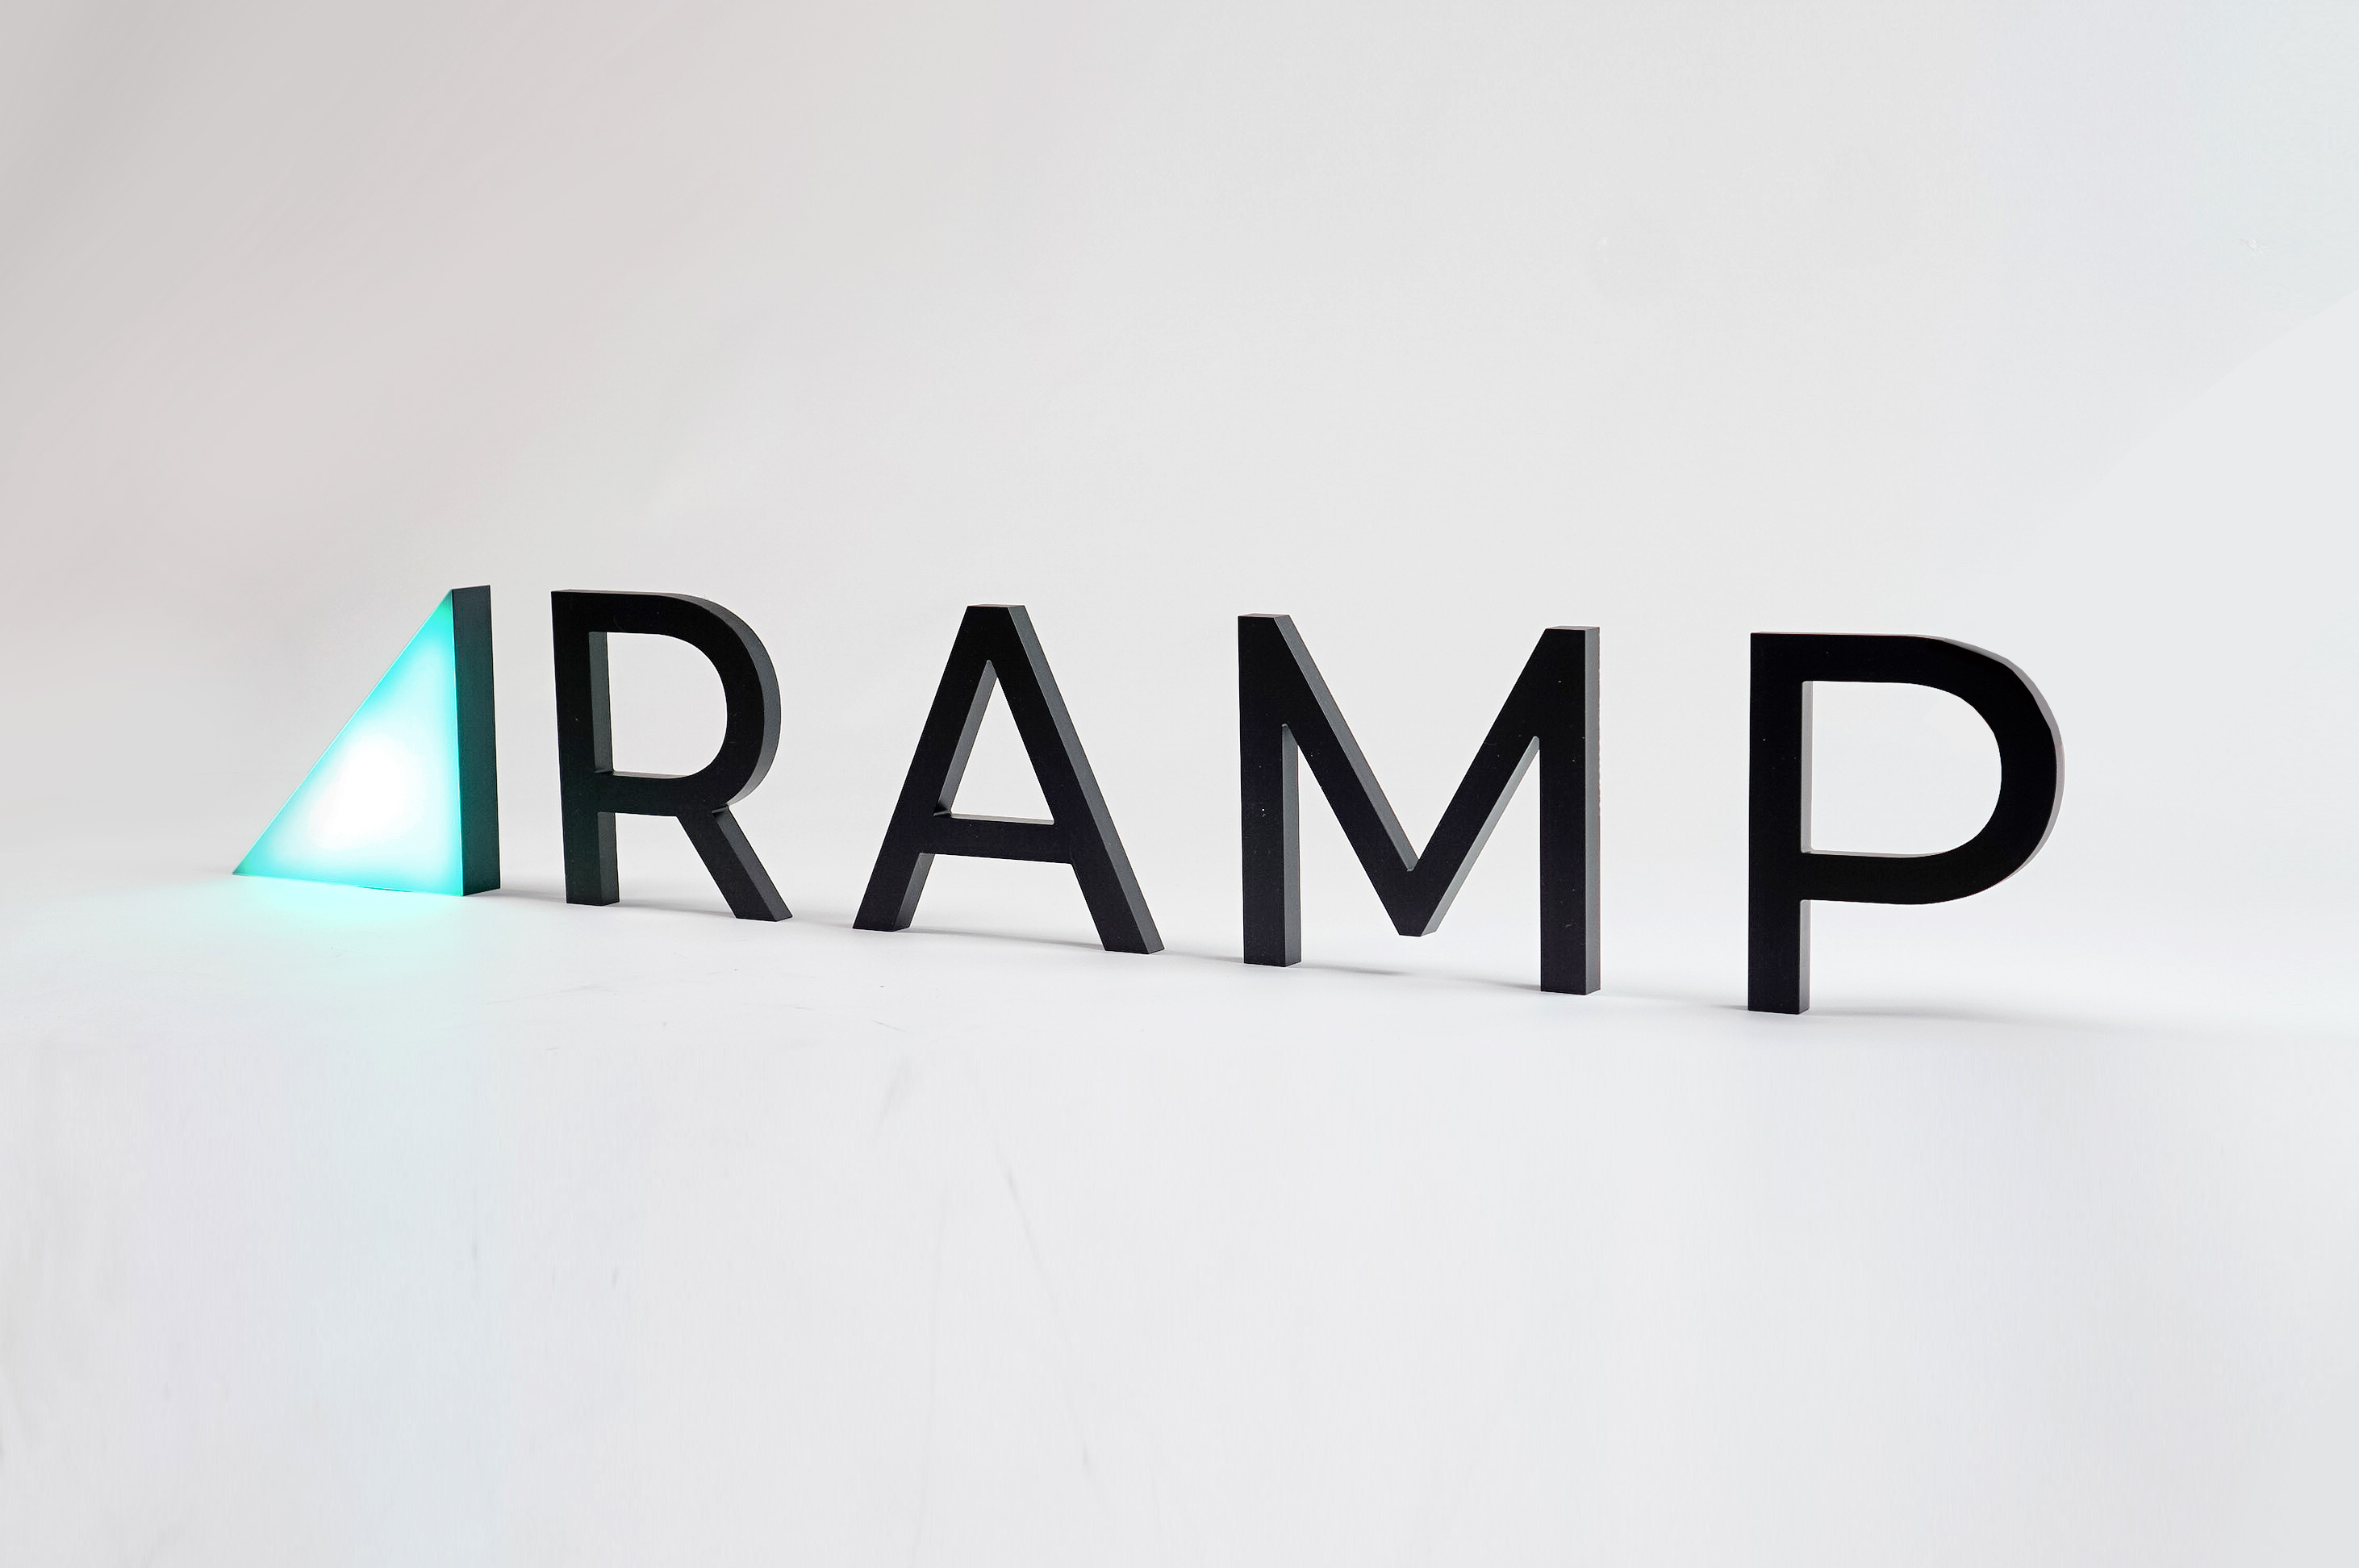 Illuminated, freestanding green triangle and black letters for Ramp, a technology company building the next generation corporate card to save businesses money.